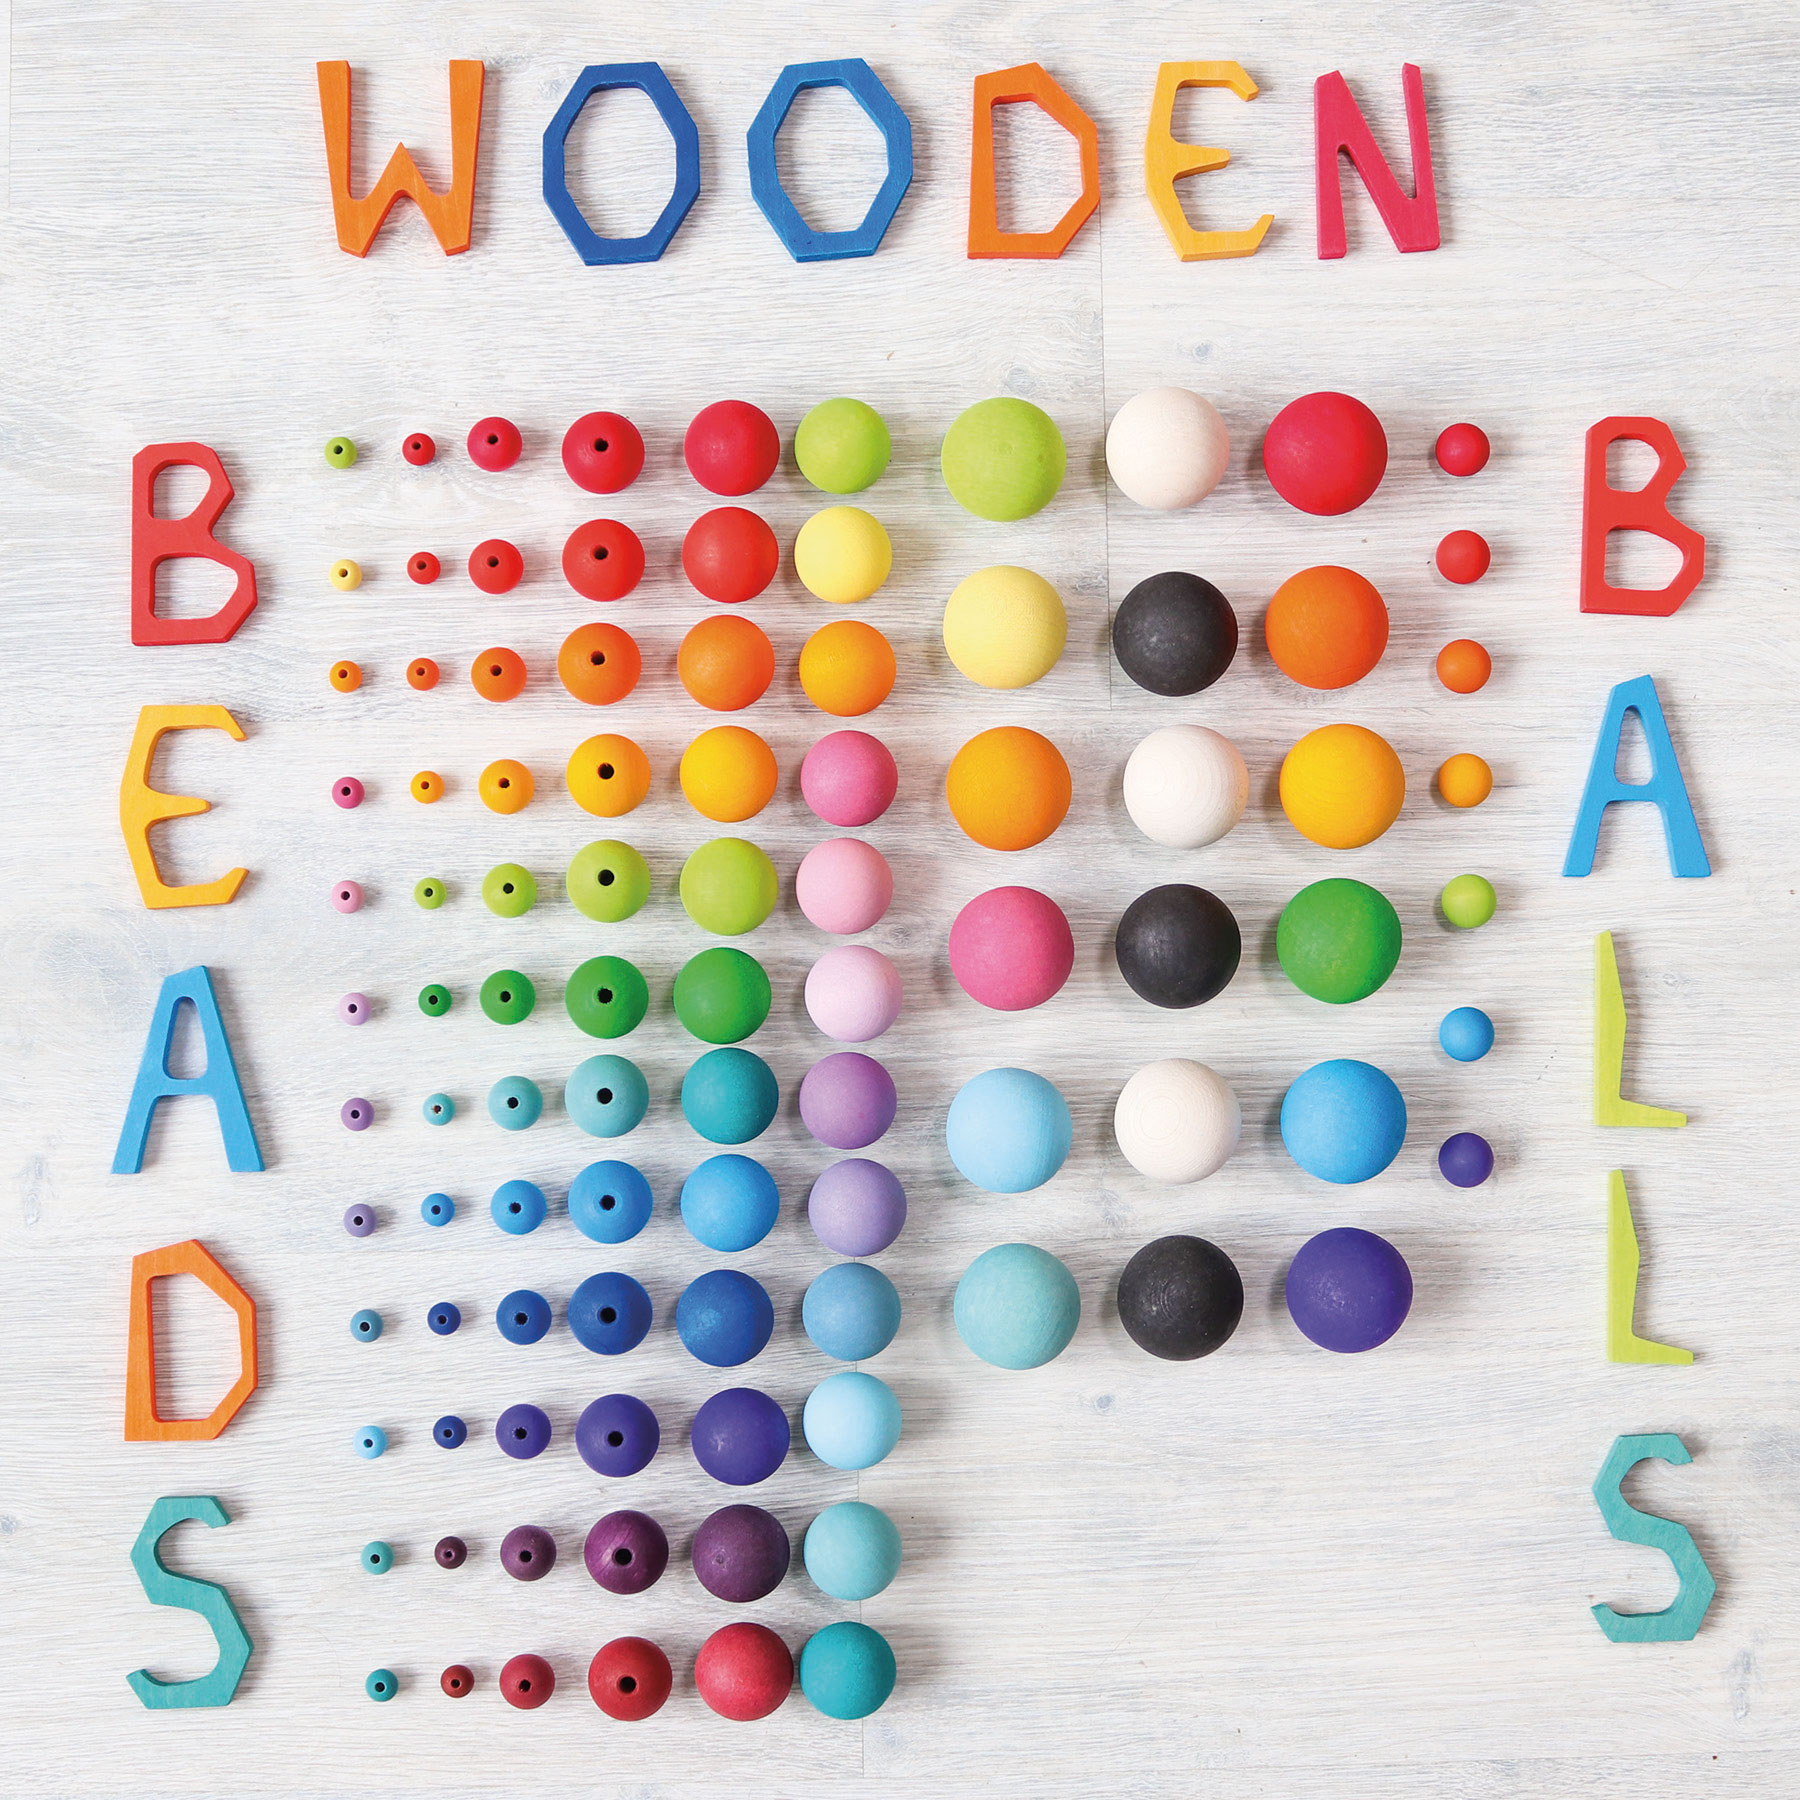 180 Wooden Beads